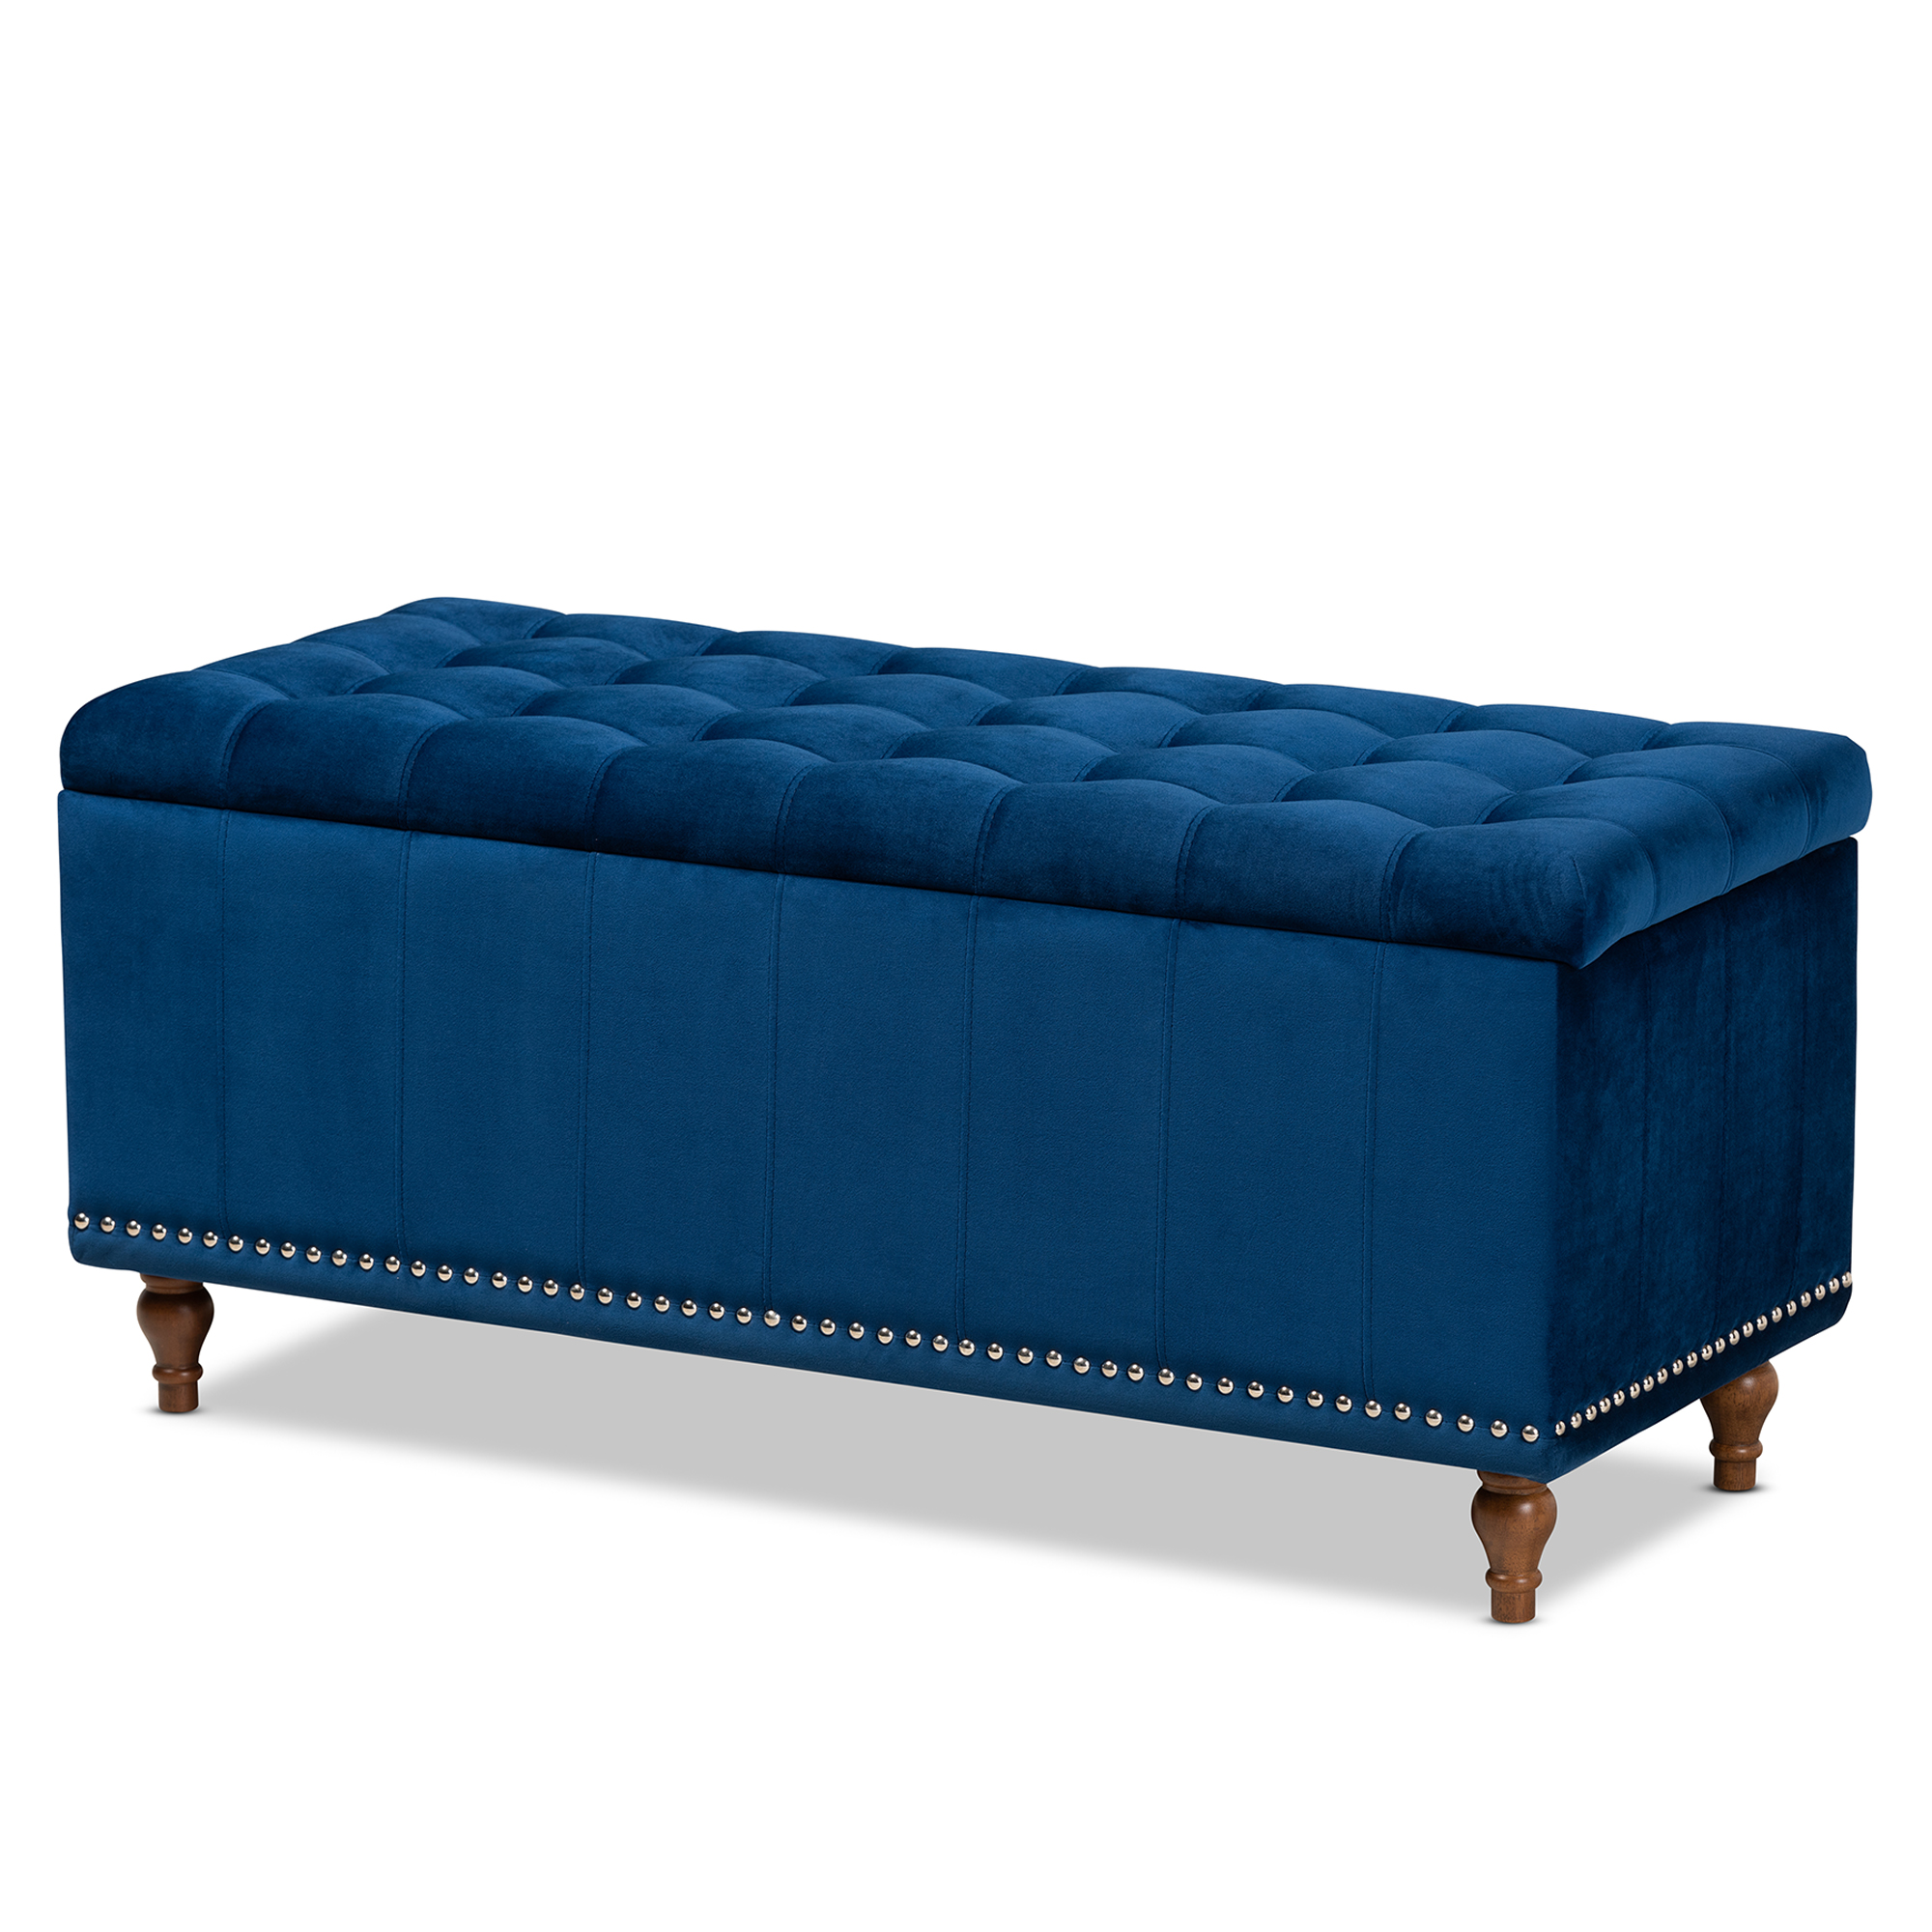 Baxton Studio Kaylee Modern and Contemporary Navy Blue Velvet Fabric Upholstered Button-Tufted Storage Ottoman Bench - image 2 of 11